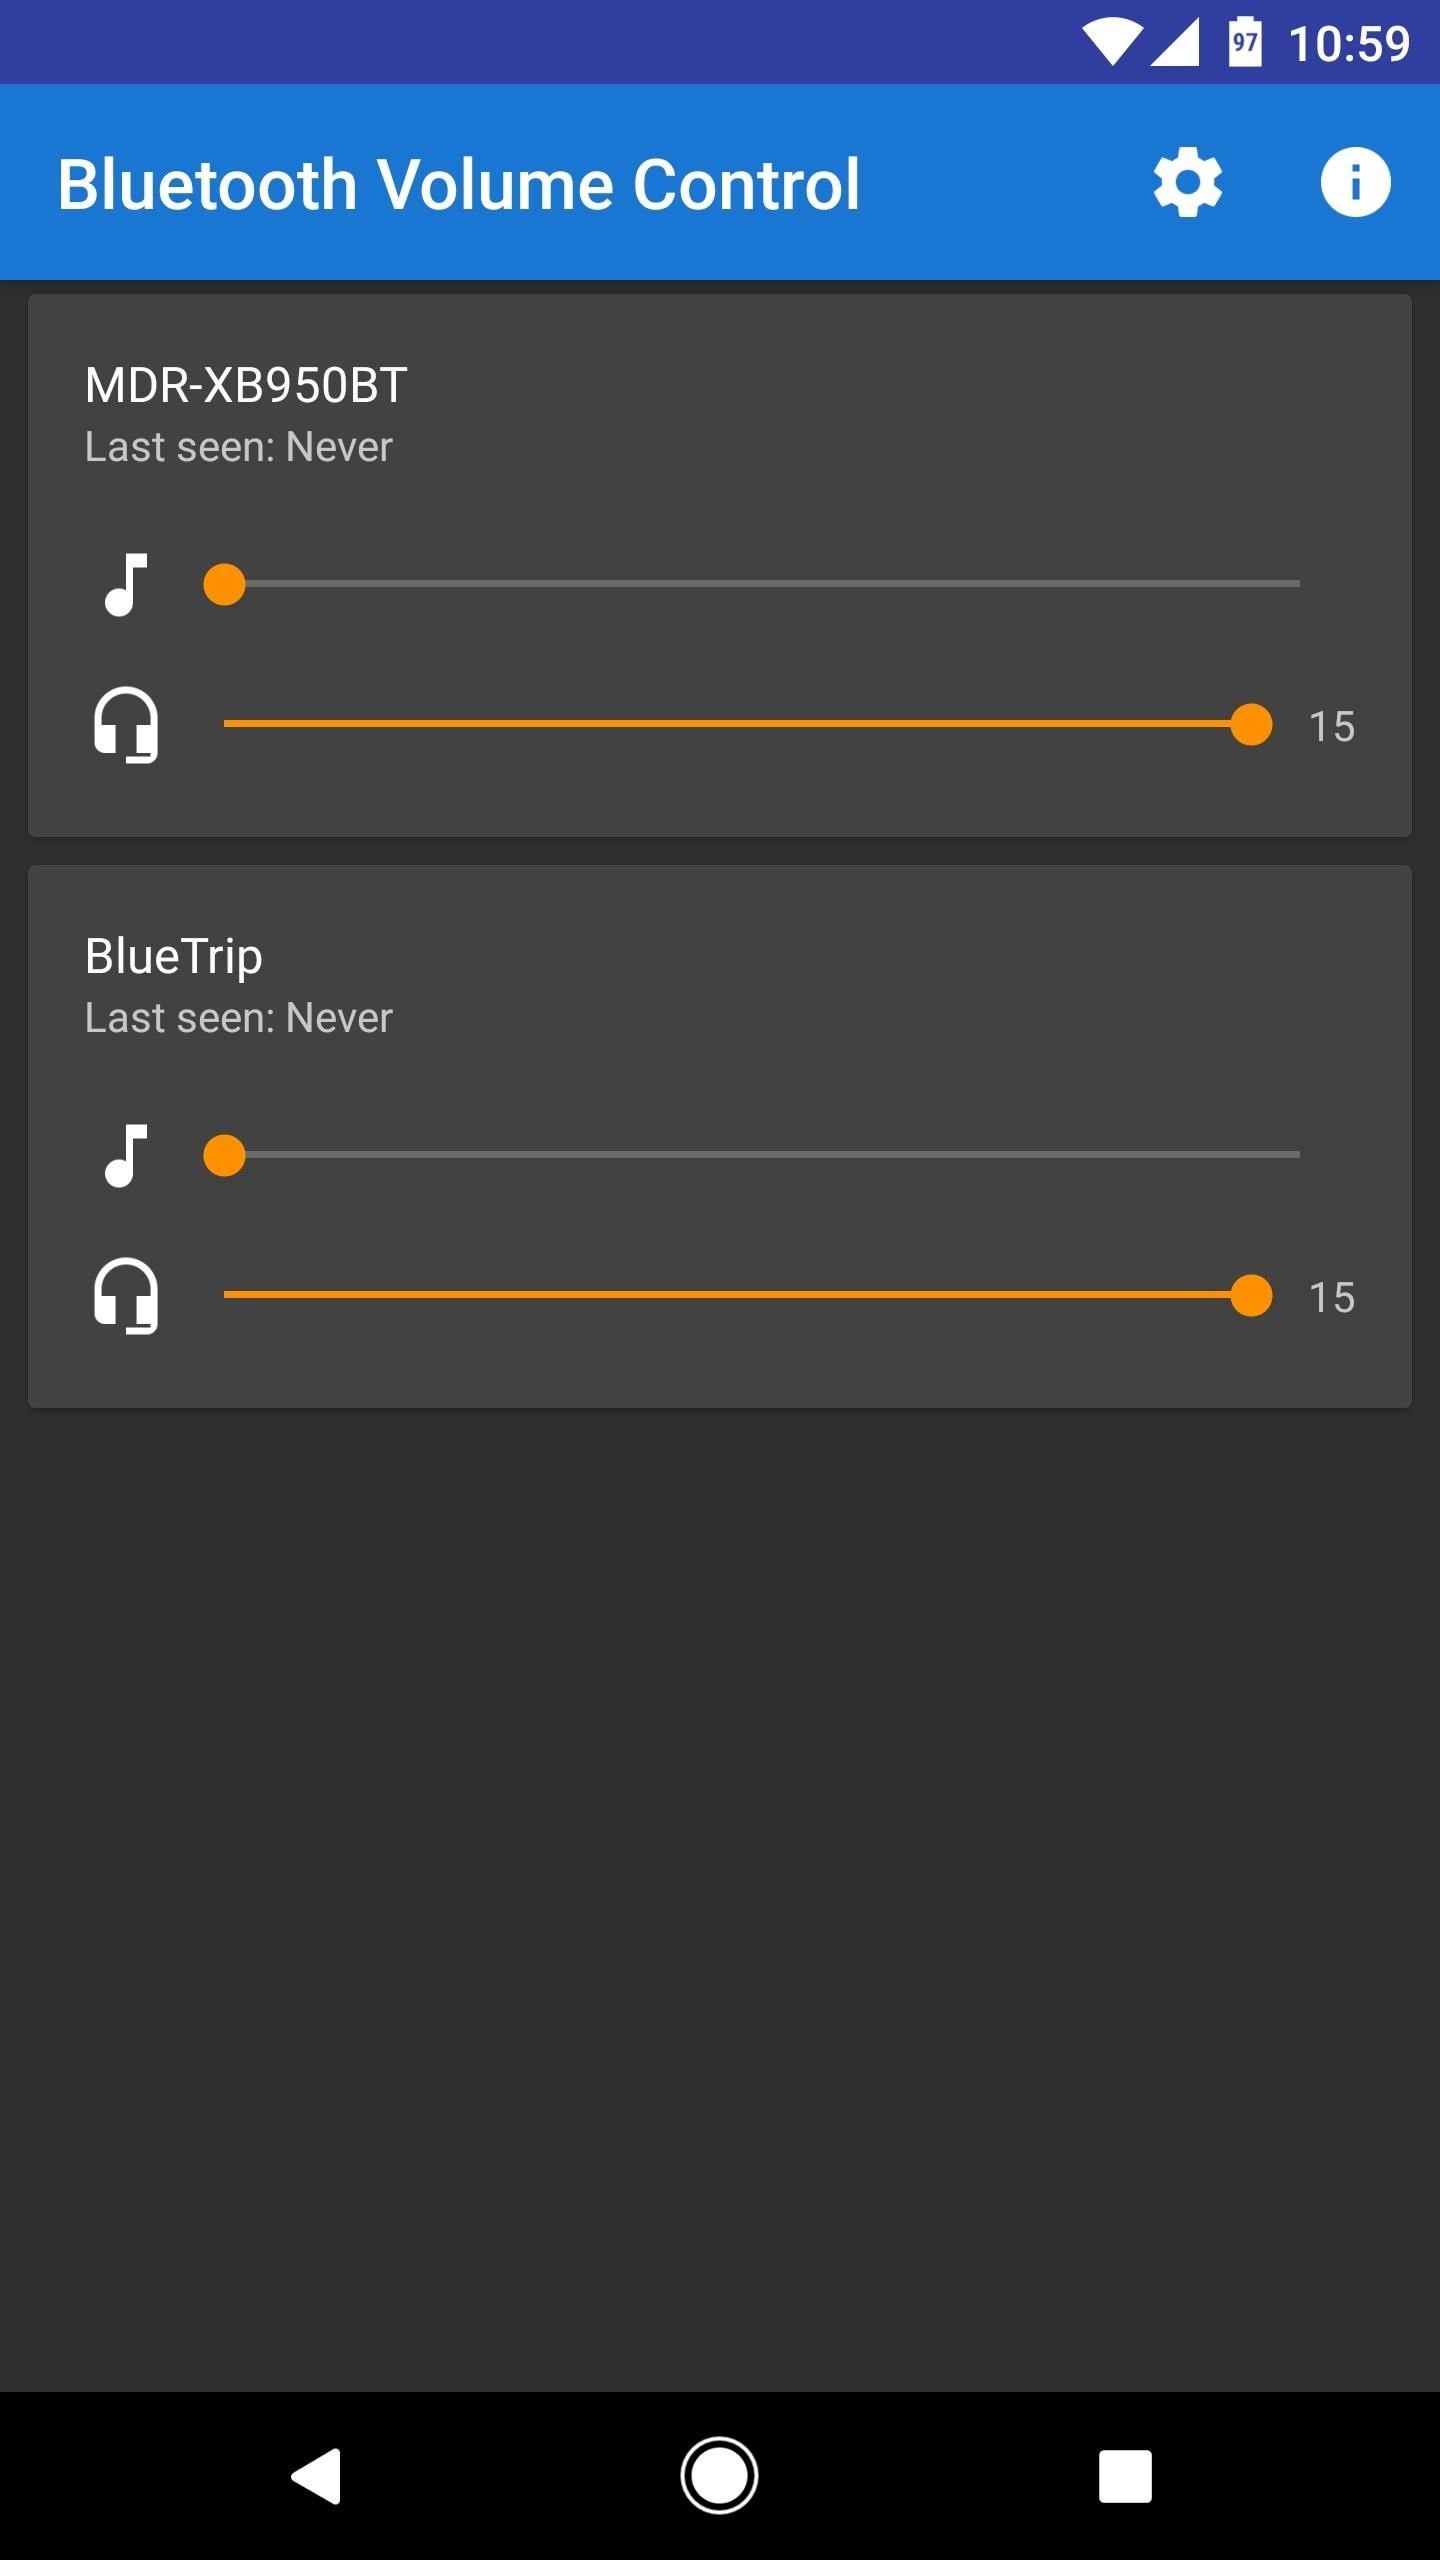 Set Default Volume Levels for Each of Your Bluetooth Accessories Individually